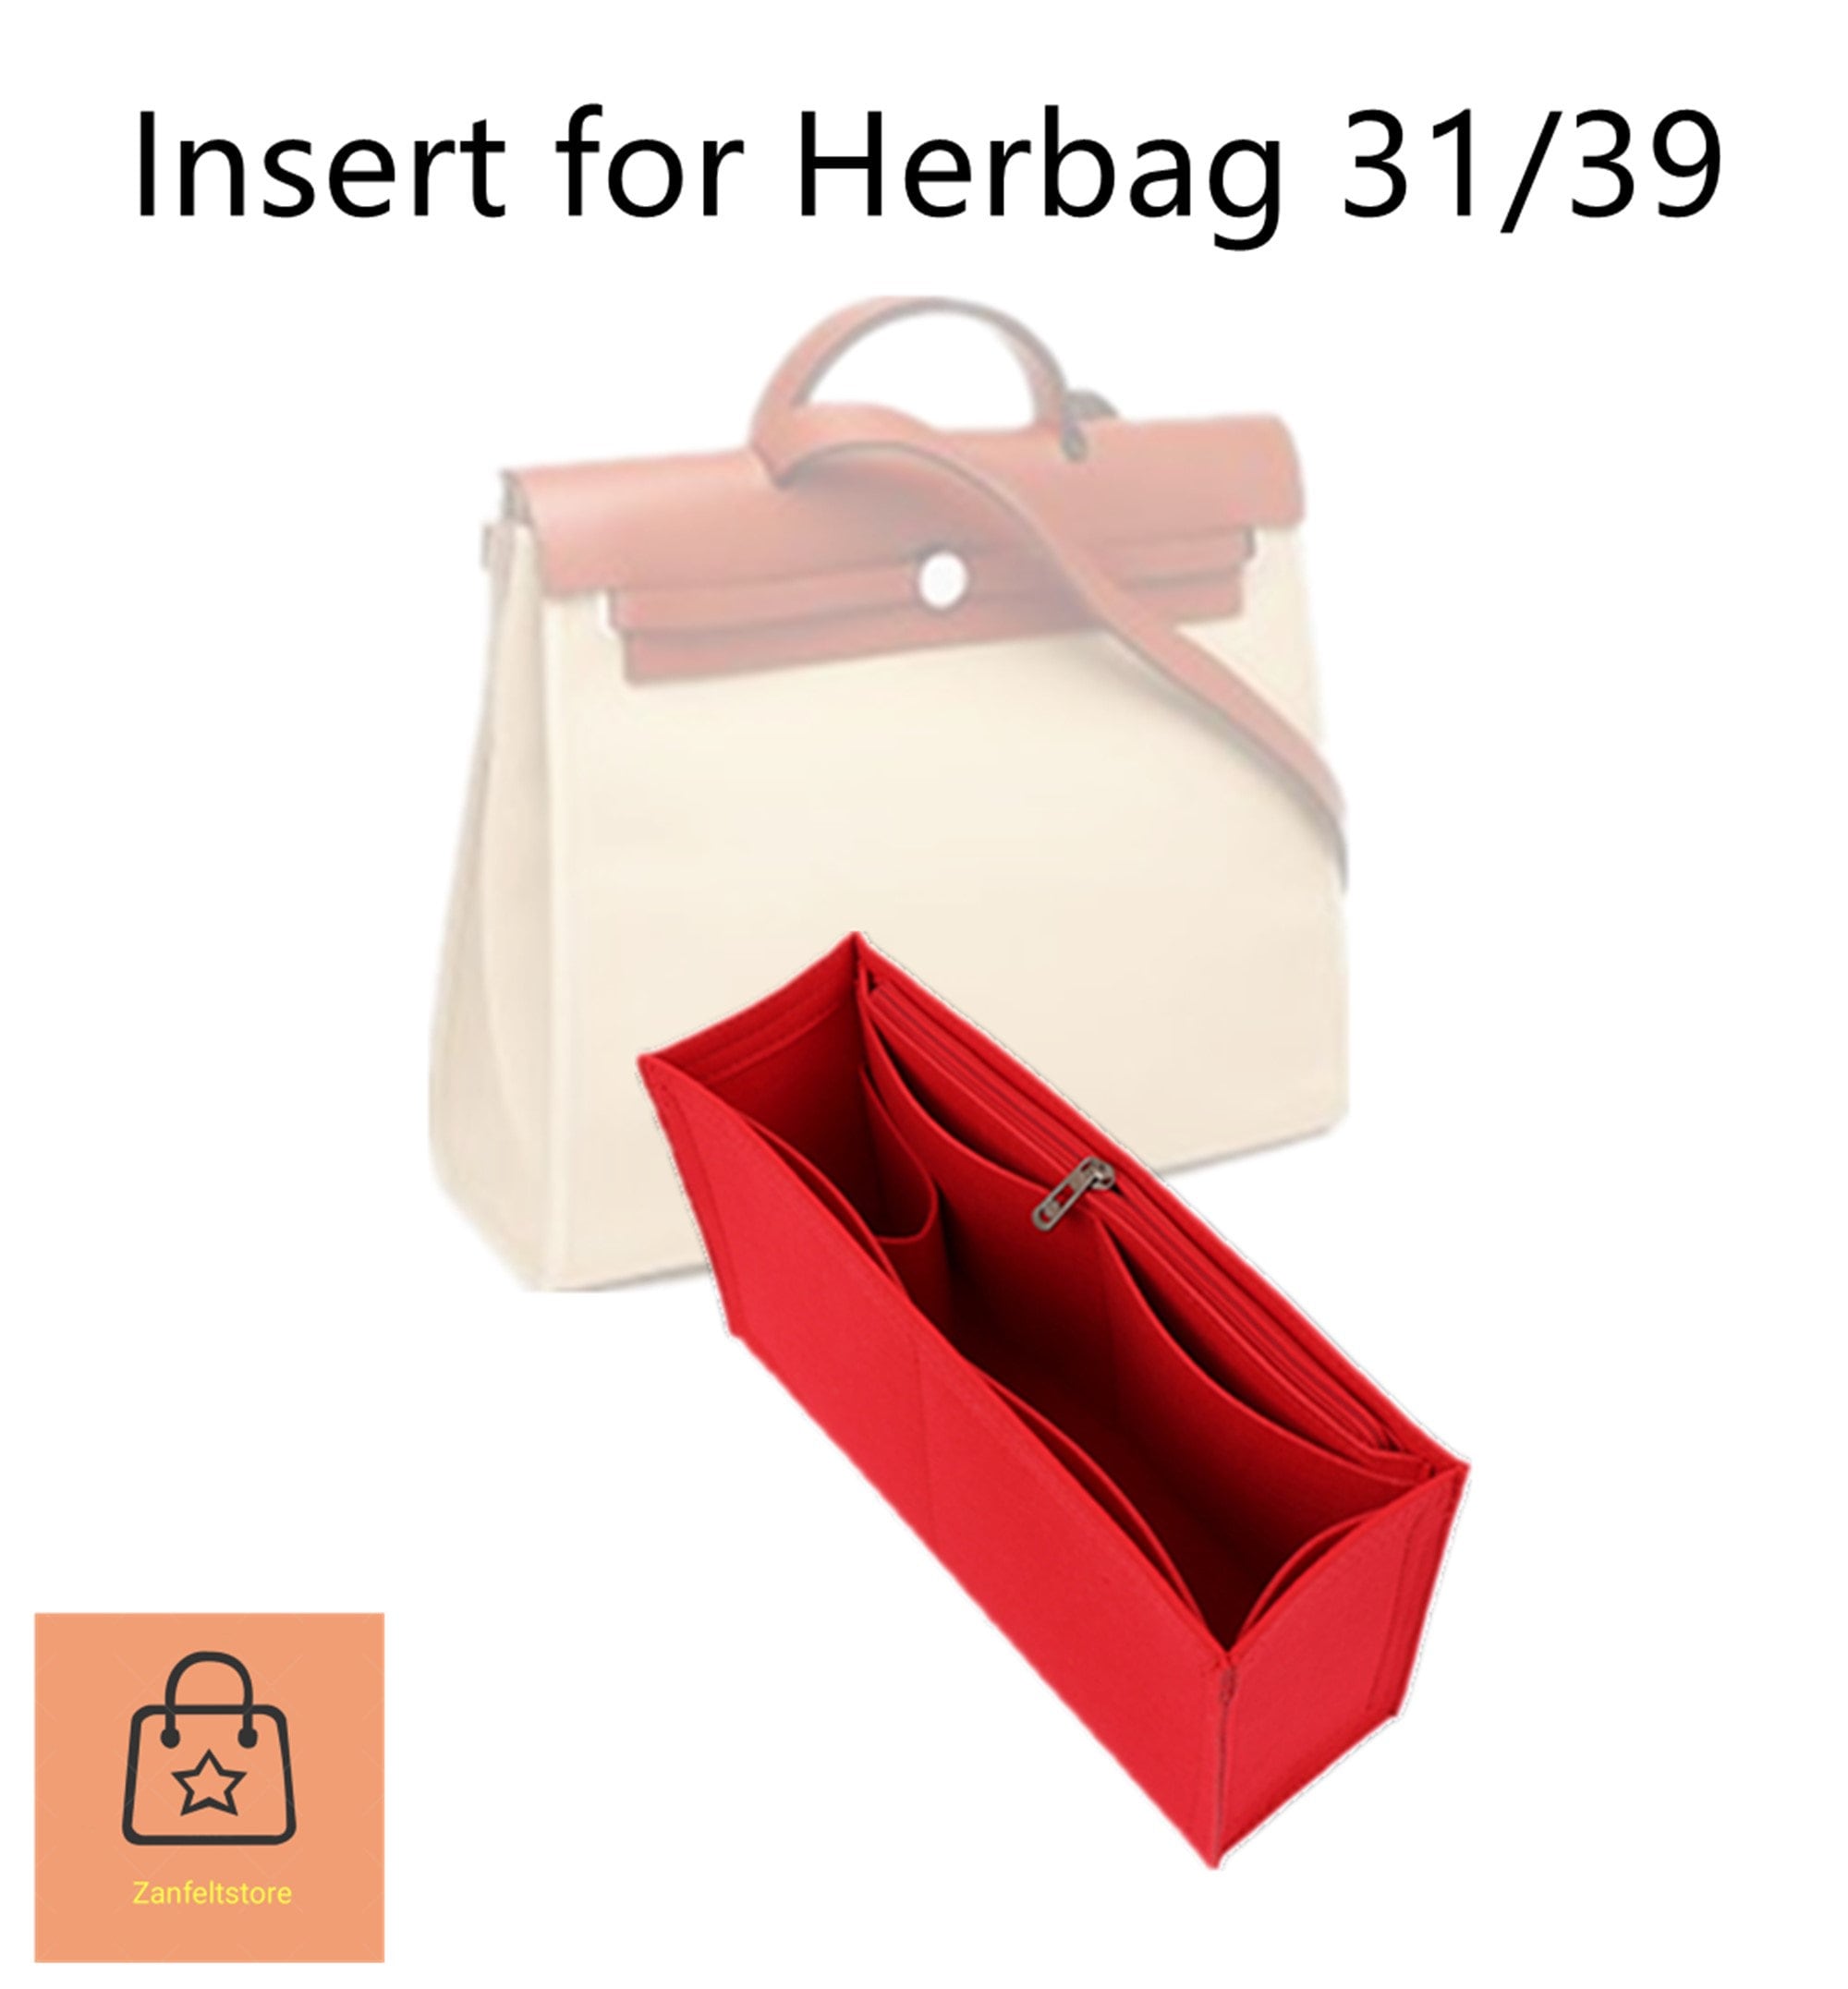 Custom Liner For Herbag 31 39 52 Insert Organizer,Any Size And